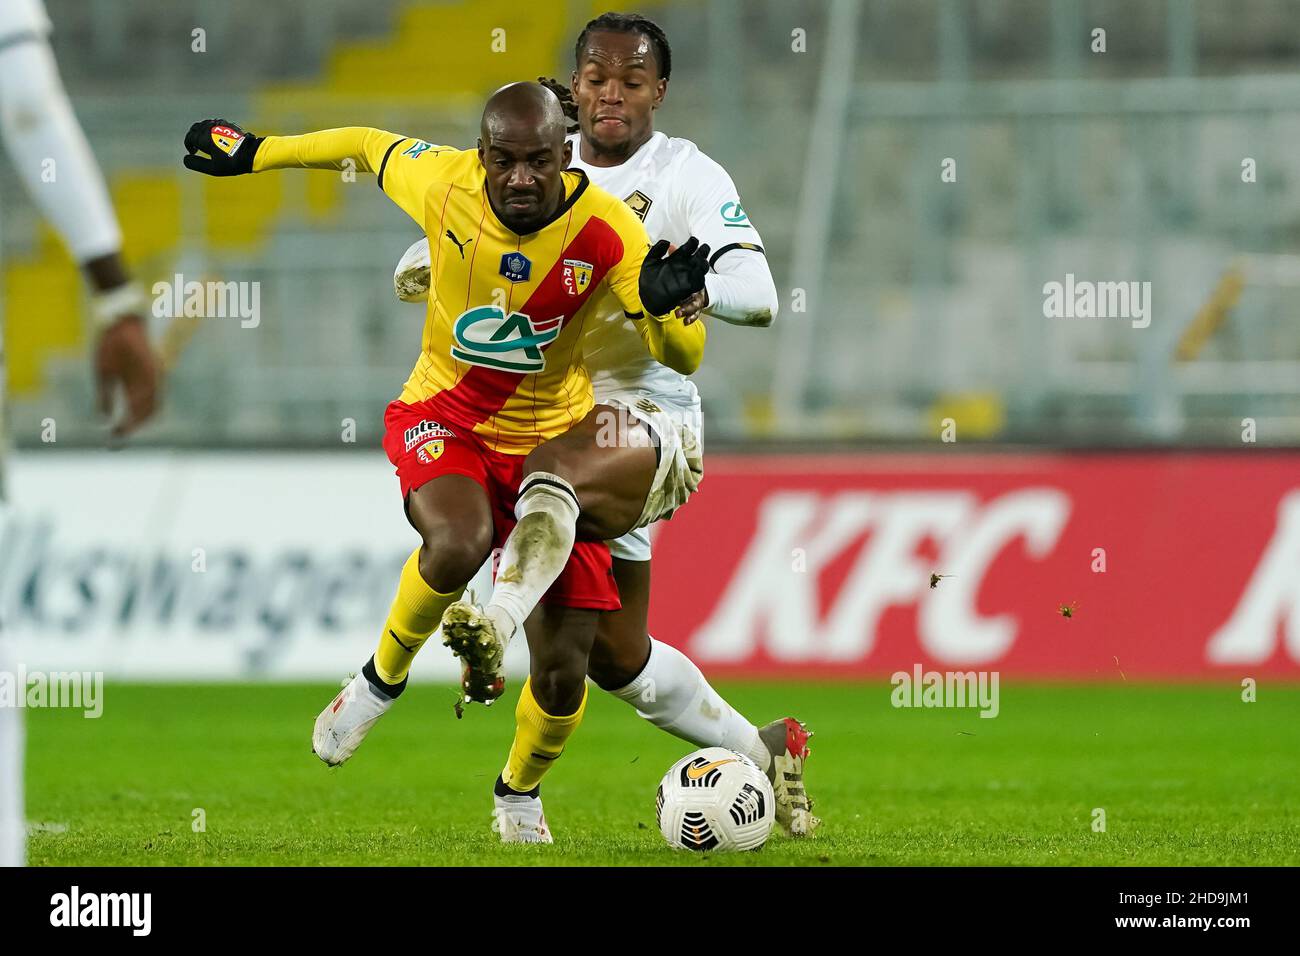 LENS, FRANCE - JANUARY 4: Gael Kakuta of RC Lens battle for possession with  Renato Sanches of Lille OSC during the French Cup match between Racing Club  de Lens and LOSC Lille